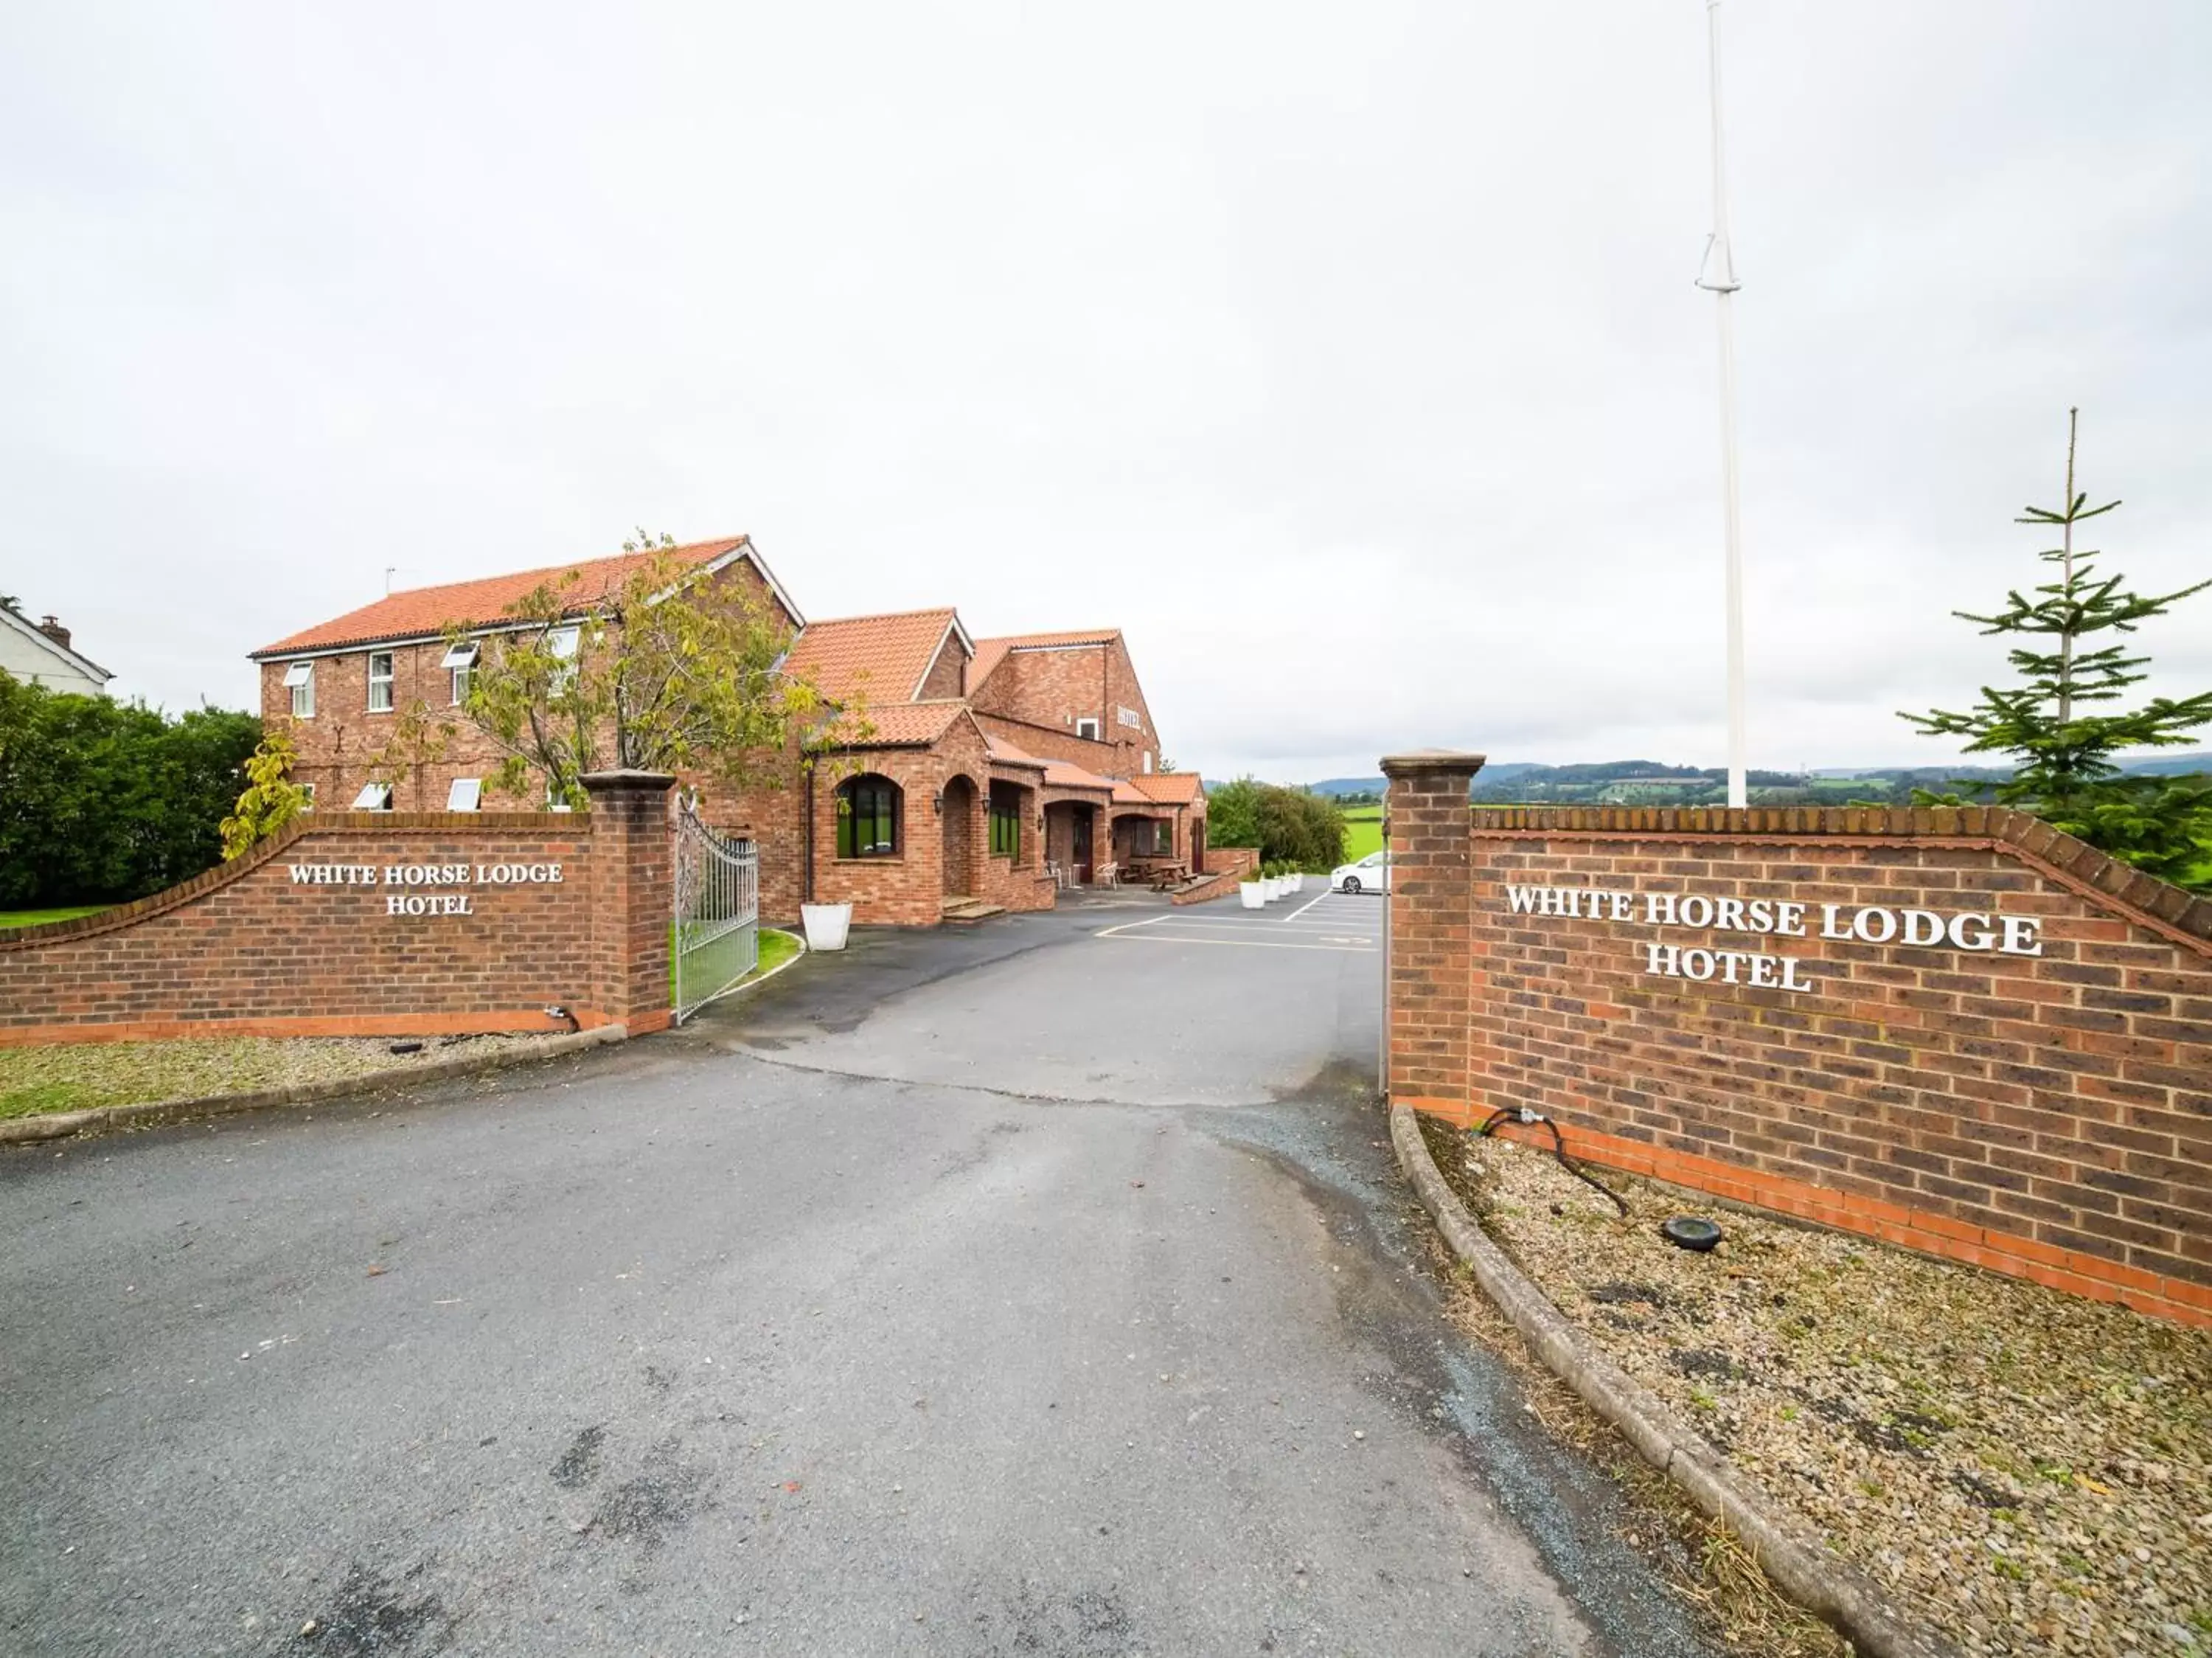 Property building, Neighborhood in OYO White Horse Lodge Hotel, East Thirsk